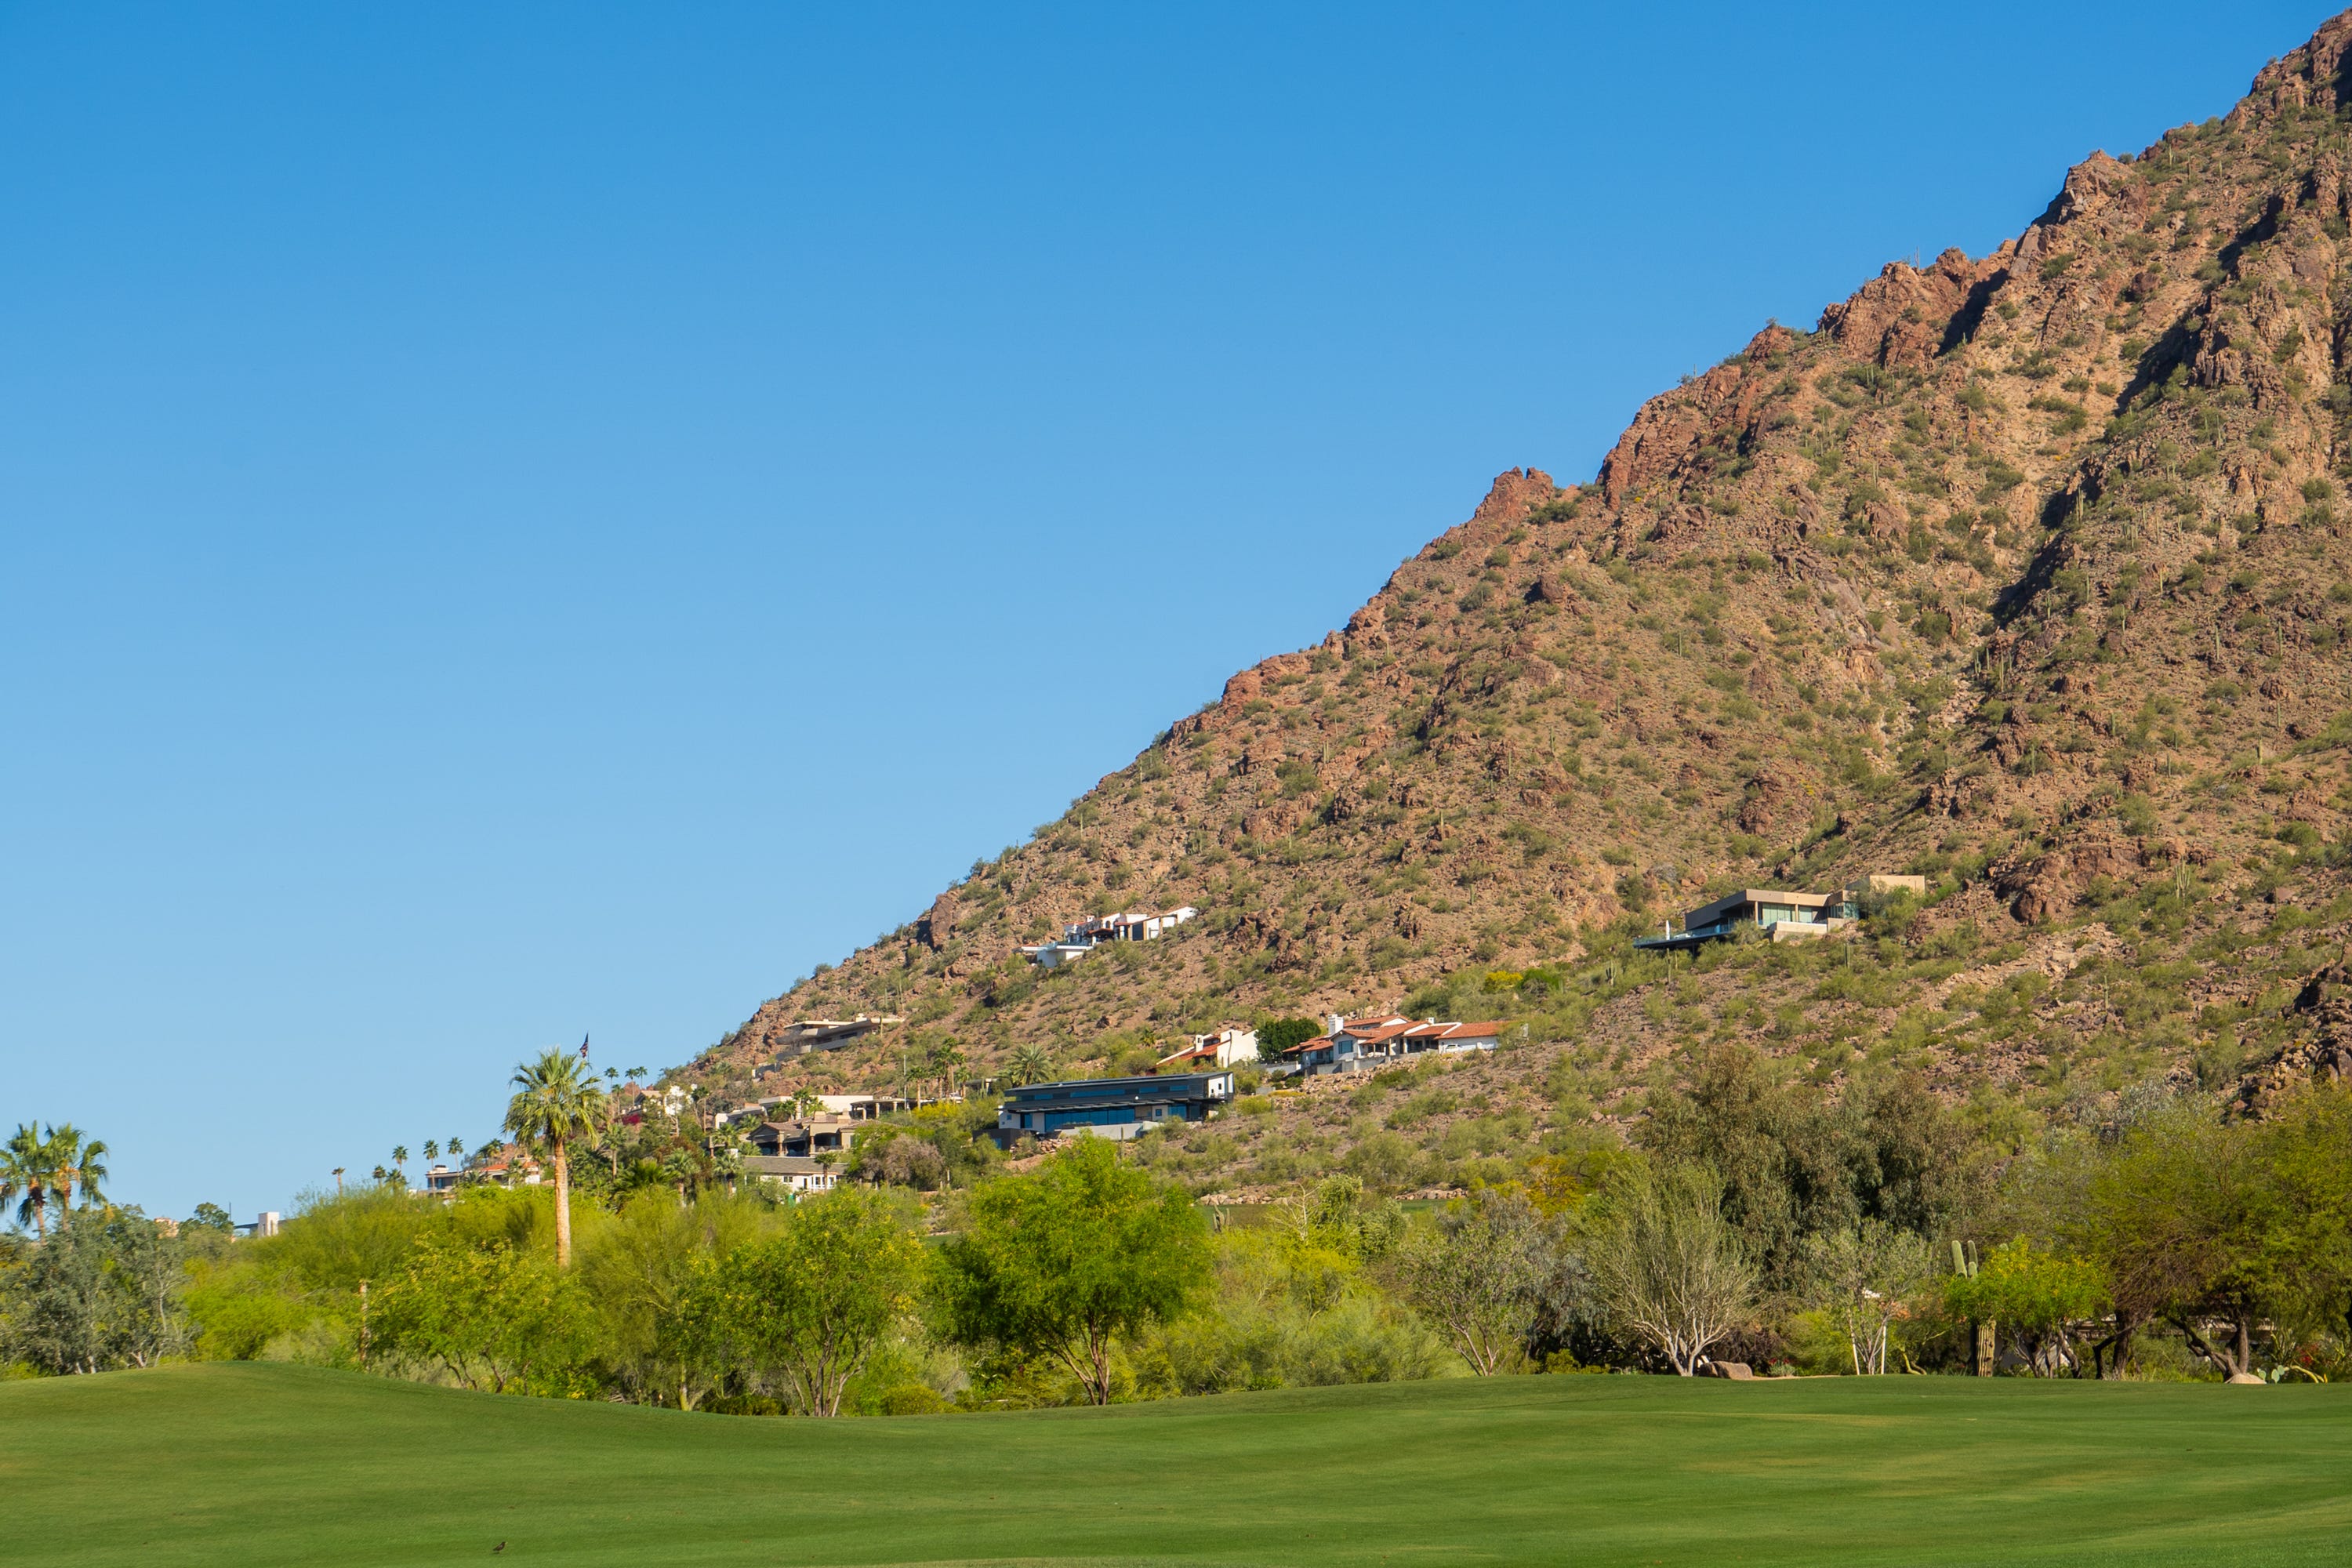 <p>We can't talk about Scottsdale without talking about Paradise Valley.</p><p>Known as the "<a href="https://www.businessinsider.com/paradise-valley-arizona-wealthy-californians-moving-privacy-luxury-lower-taxes-2024-2">Beverley Hills of Arizona</a>," the town between Phoenix and Scottsdale is home to mostly gated estates along Camelback Mountain and Mummy Mountain.</p><p>As Business Insider previously reported, it's the richest municipality in the state. The median home listing price is $5.5 million, and the most expensive on the market is $75 million, <a href="https://www.realtor.com/realestateandhomes-search/Paradise-Valley_AZ/overview">according to Realtor.com</a>.</p>